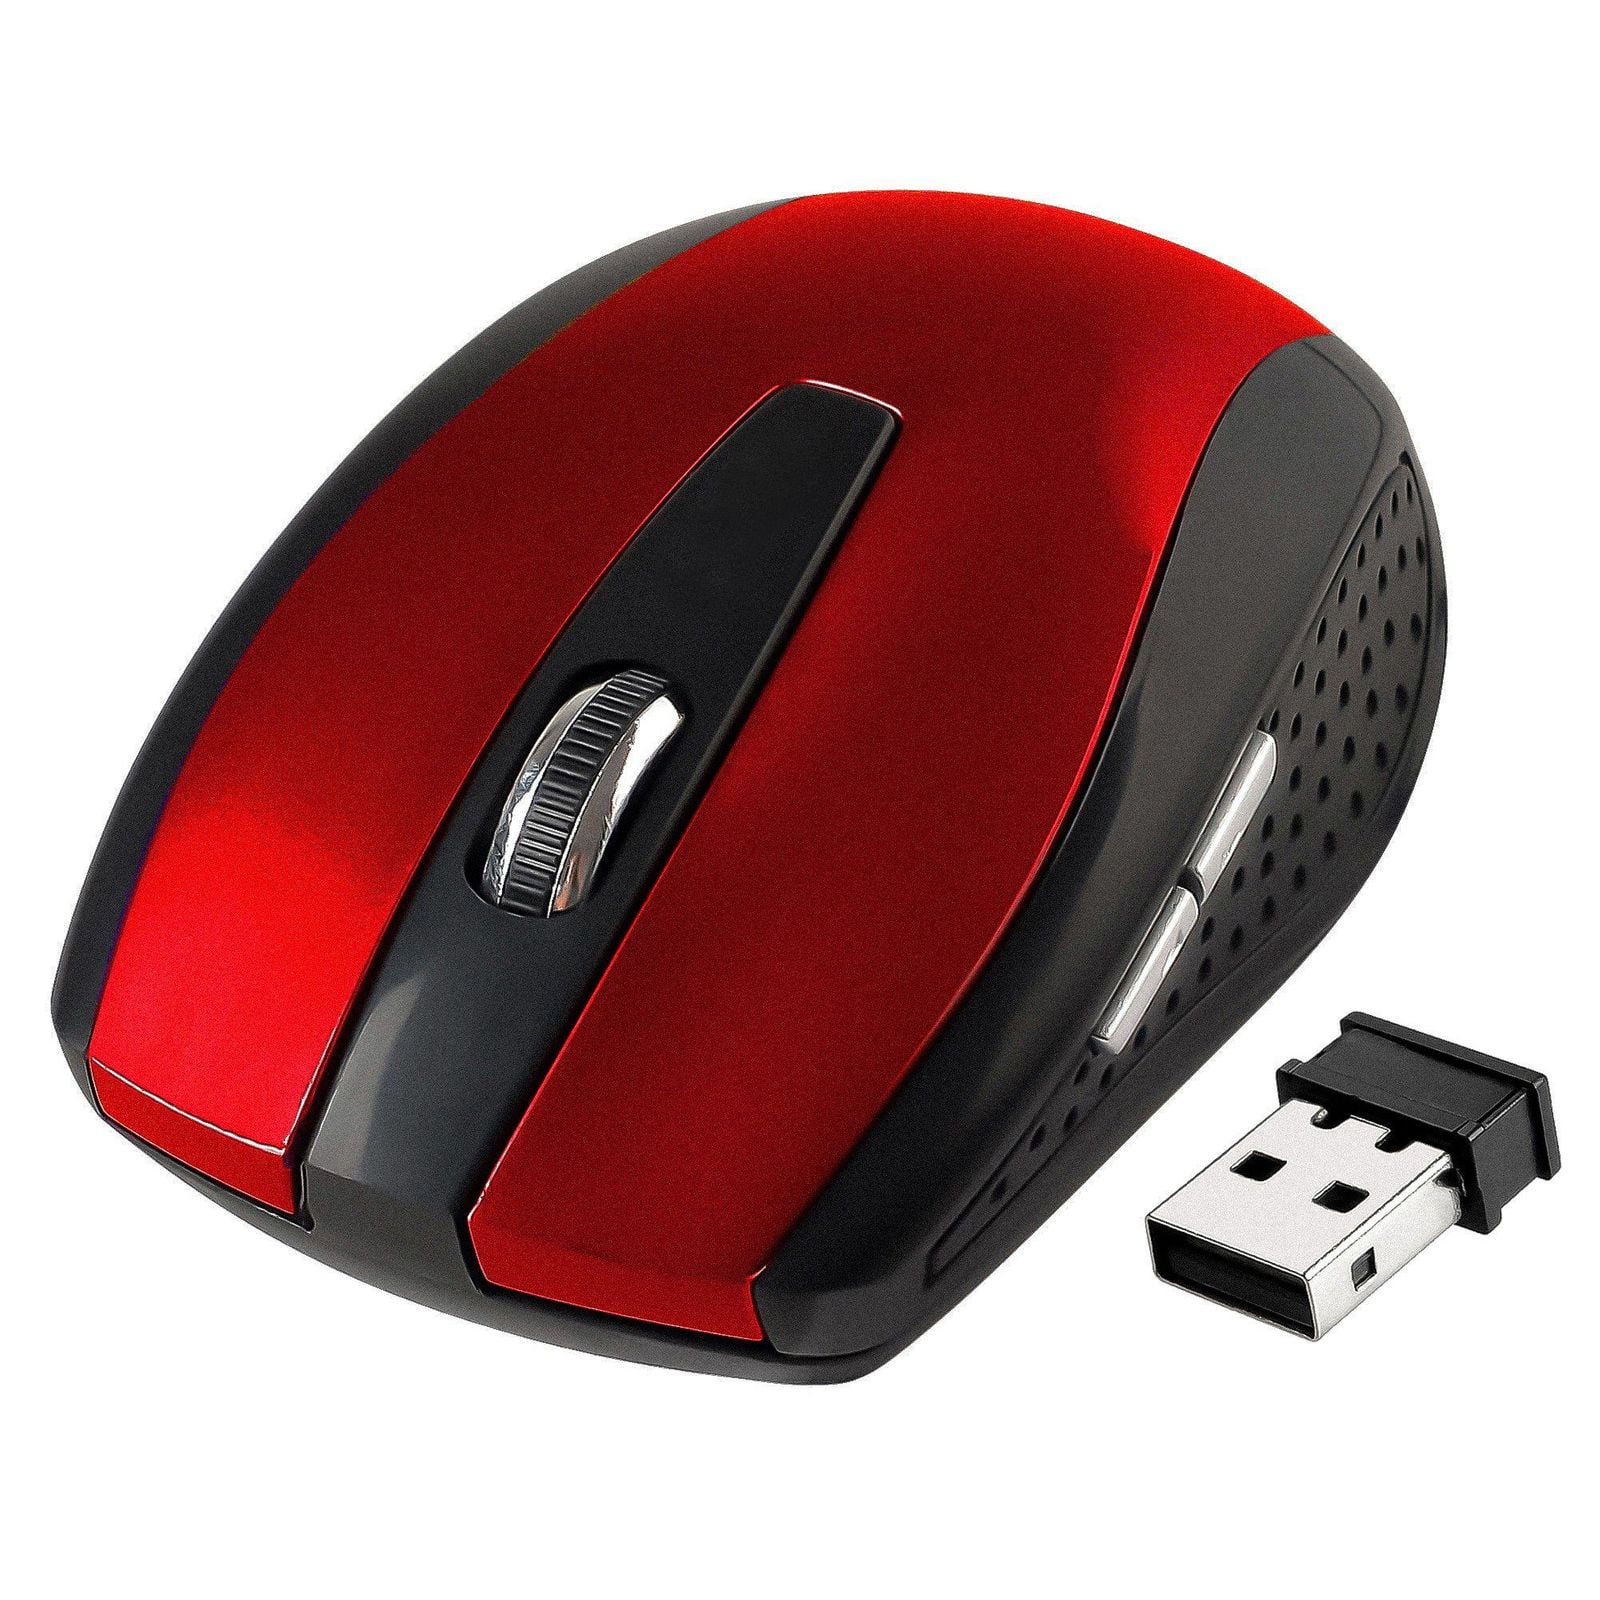 mouse wifi wireless computer black blue white red pink 2.4ghz 1000 1200 1600 dpi 